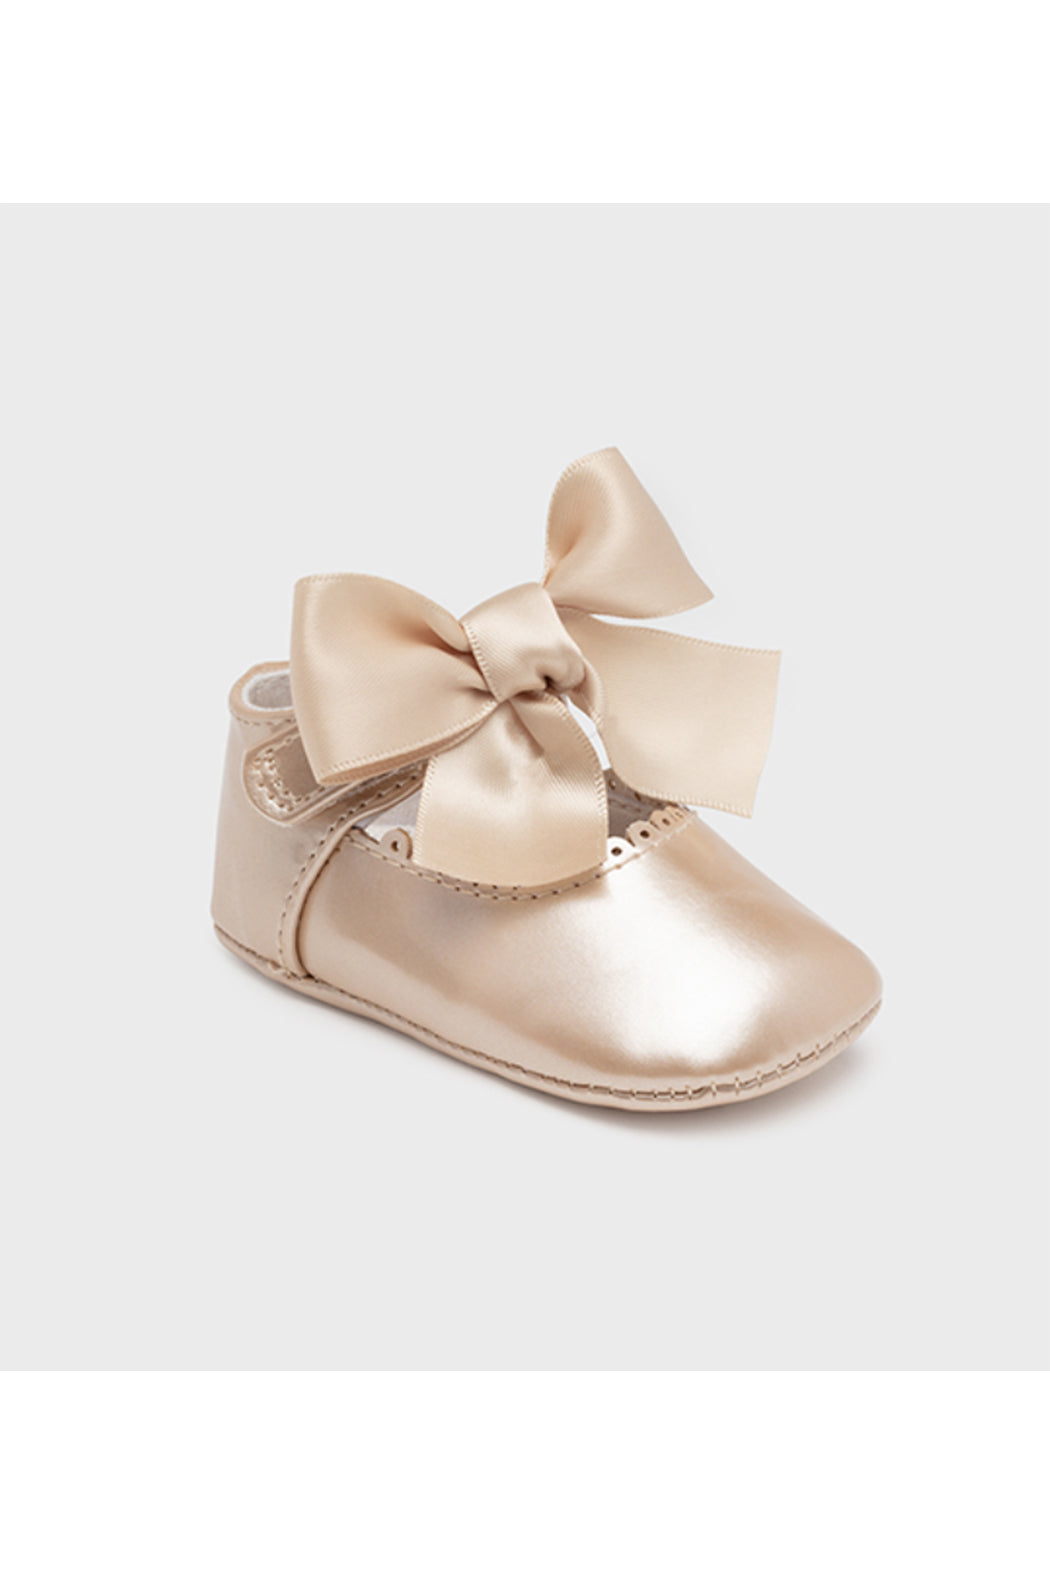 Mary Jane Shoes-Golden